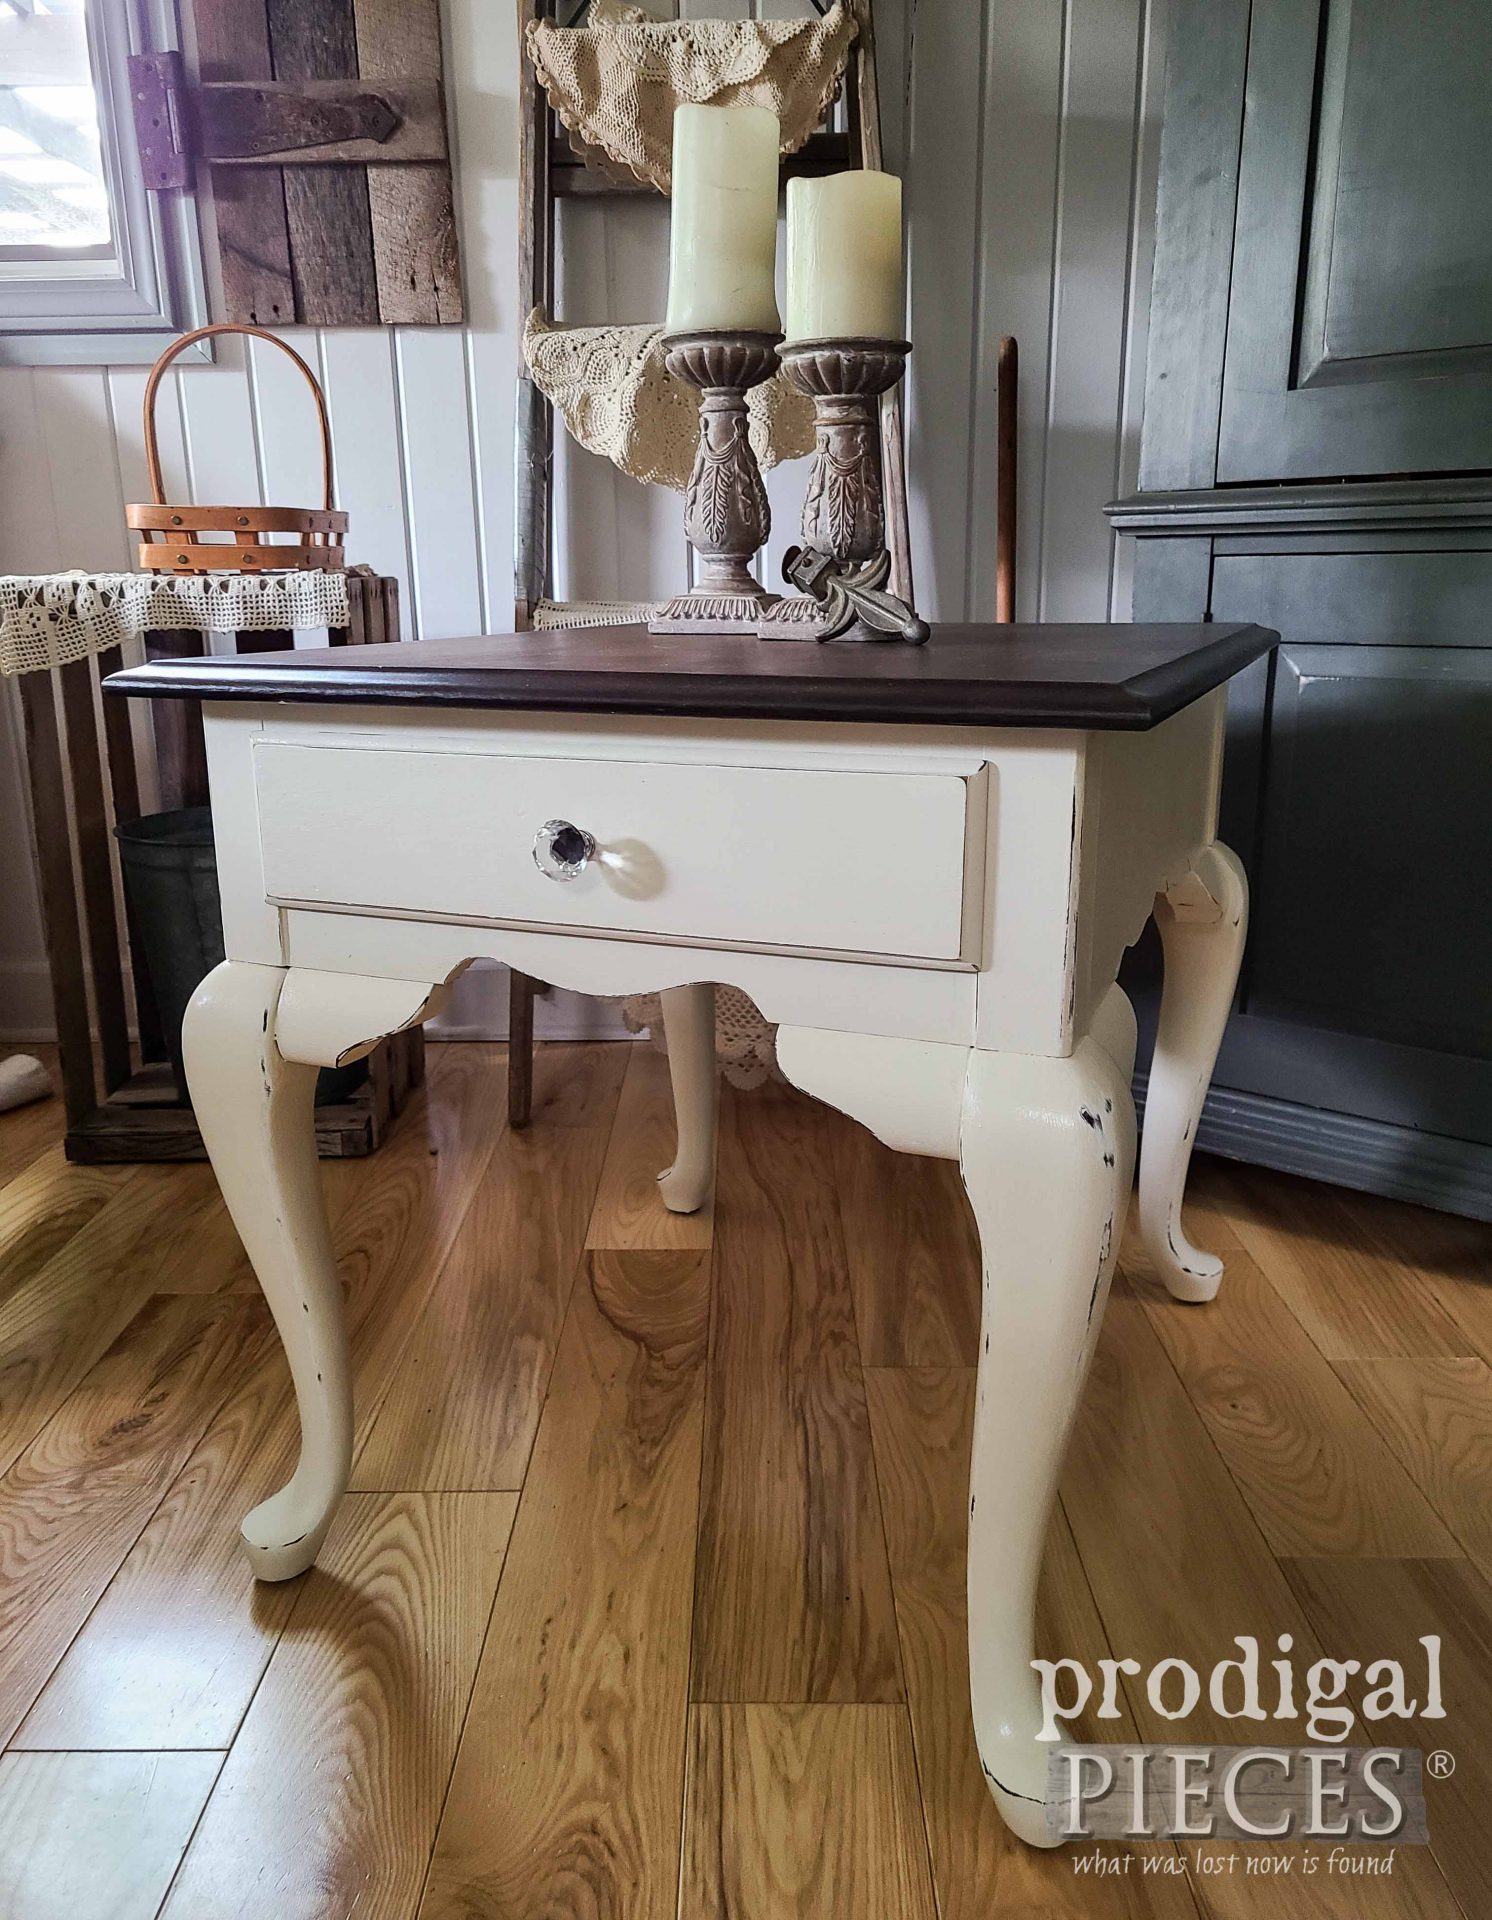 Rustic Chic Farmhouse Side Table in Queen Anne Style for Vintage Decor by Prodigal Pieces | prodigalpieces.com #prodigalpieces #furniture #vintage #farmhouse #home